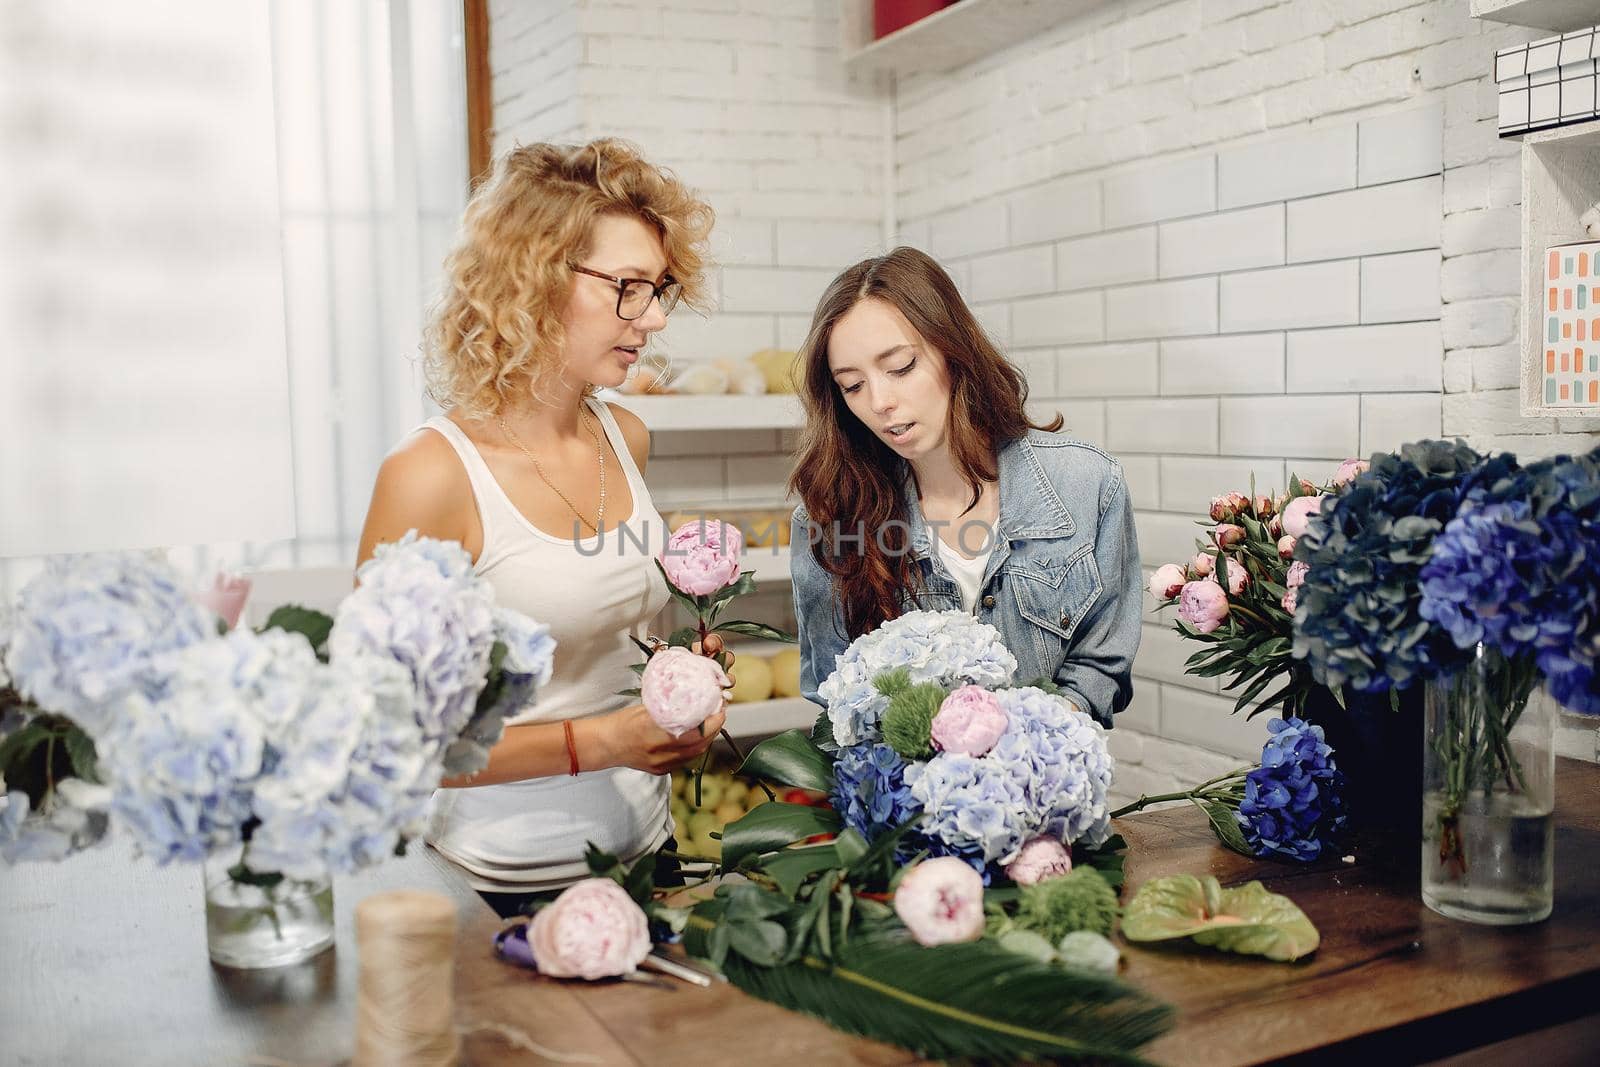 Girls with a flowers. Florist making a bouquet